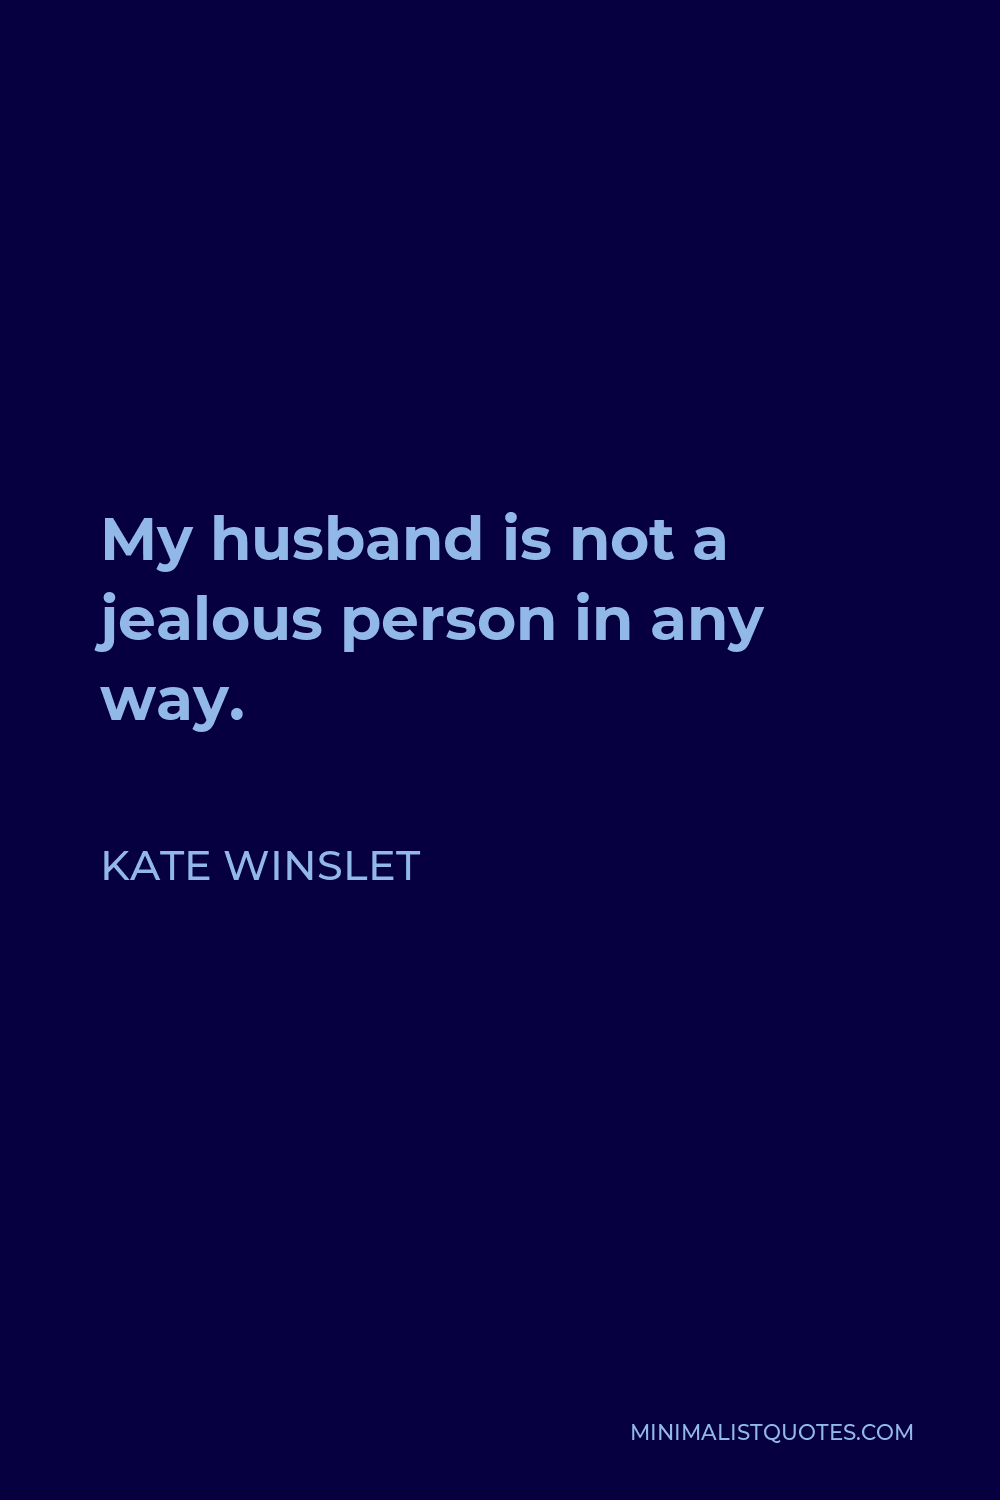 Kate Winslet Quote - My husband is not a jealous person in any way.